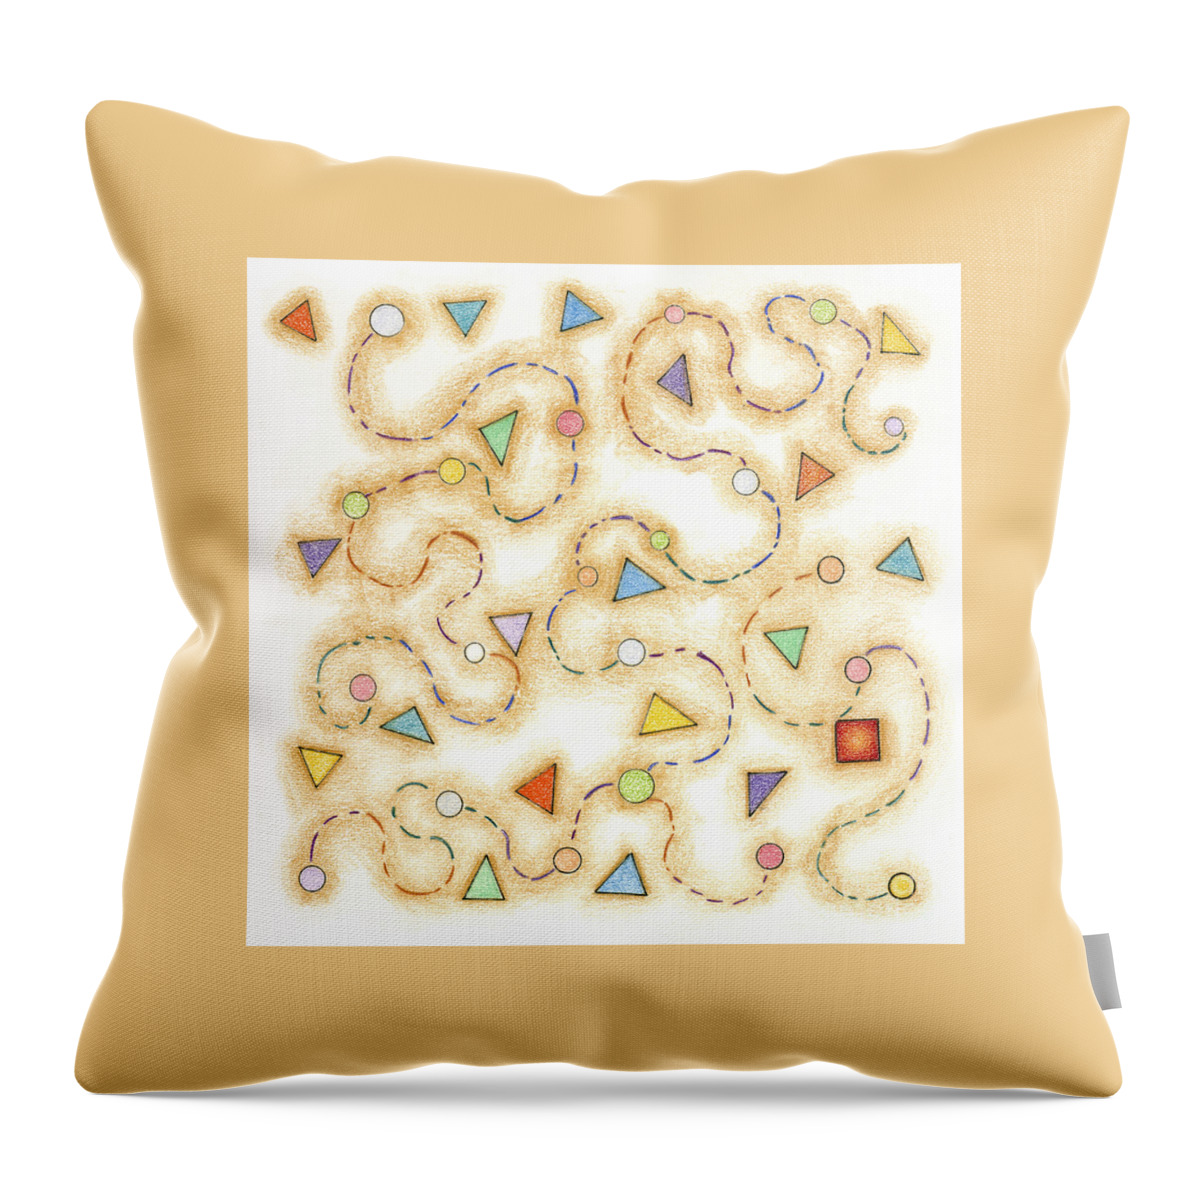 Colorful Throw Pillow featuring the drawing Where's the Square? by Melissa A Benson